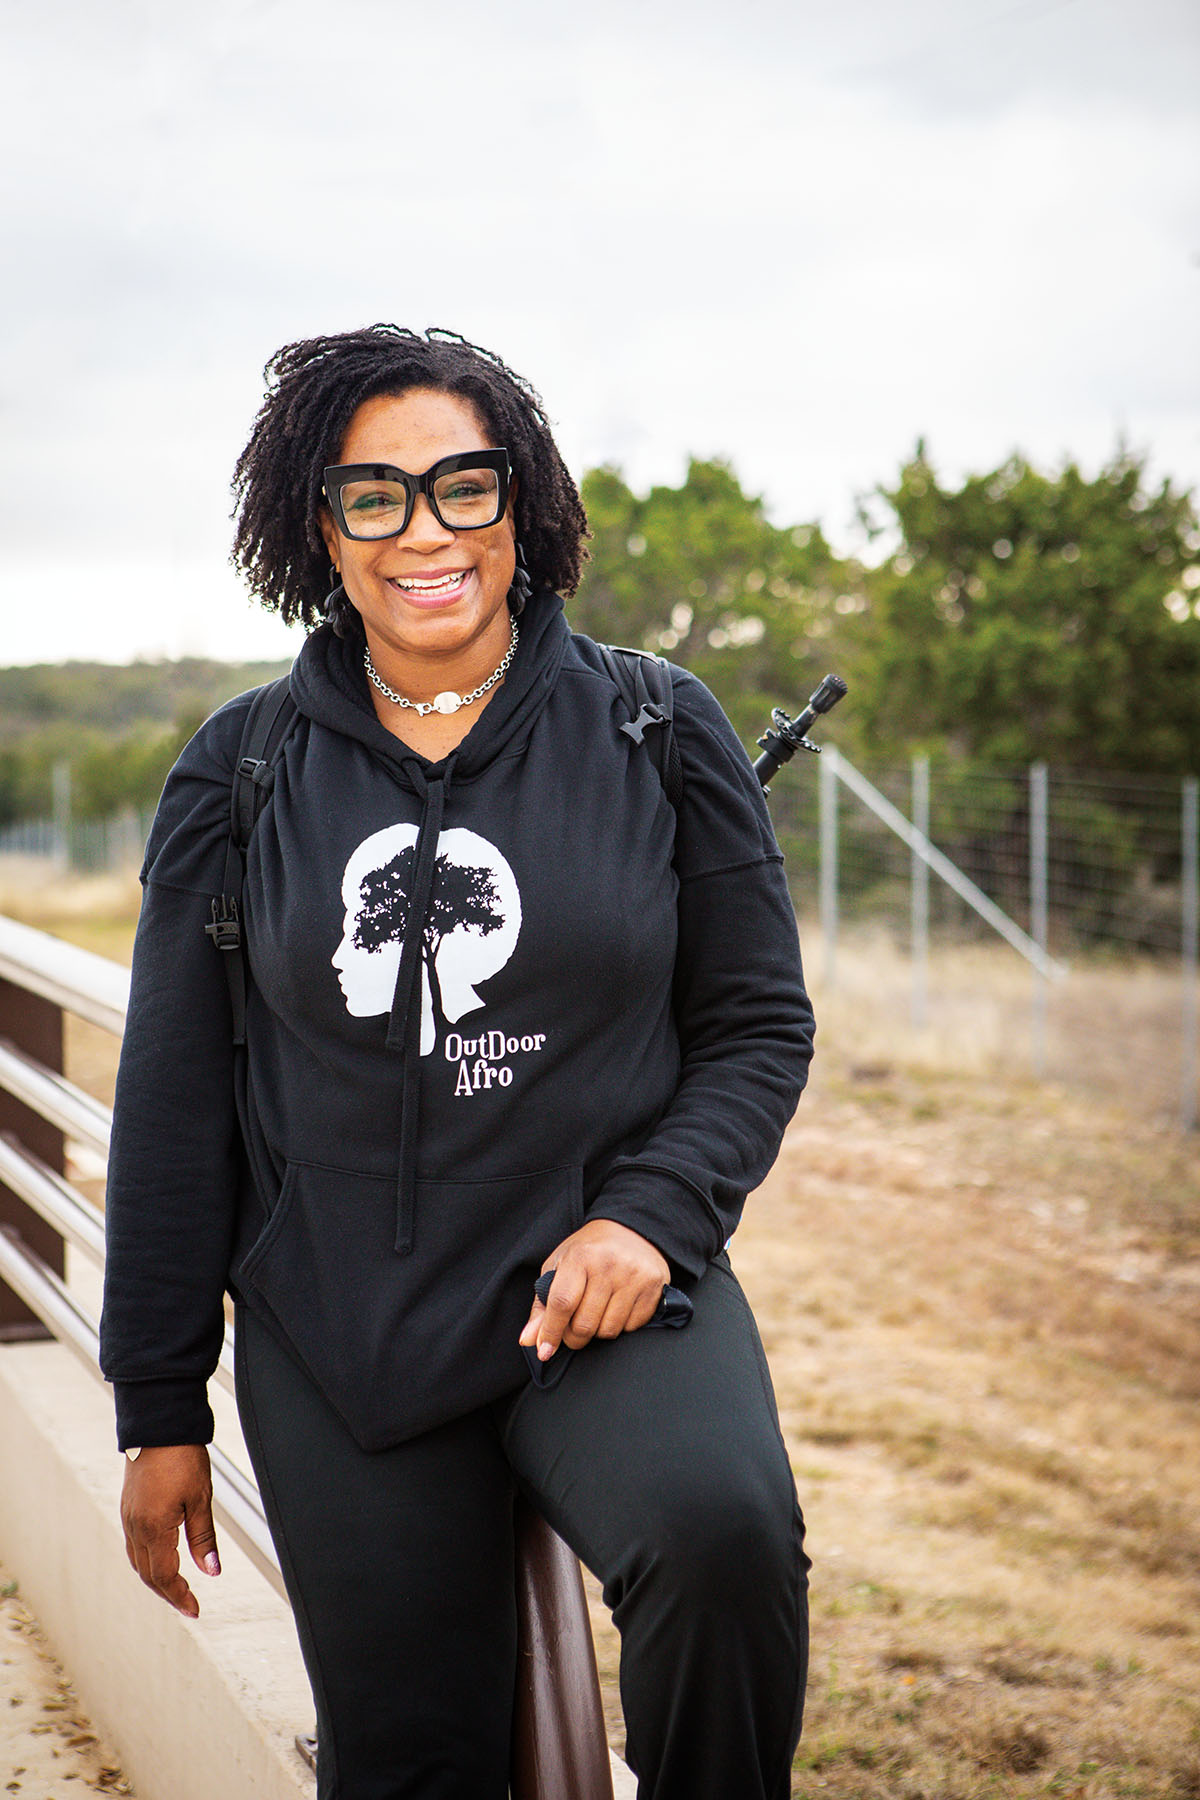 A woman in a black sweatshirt poses on a trail